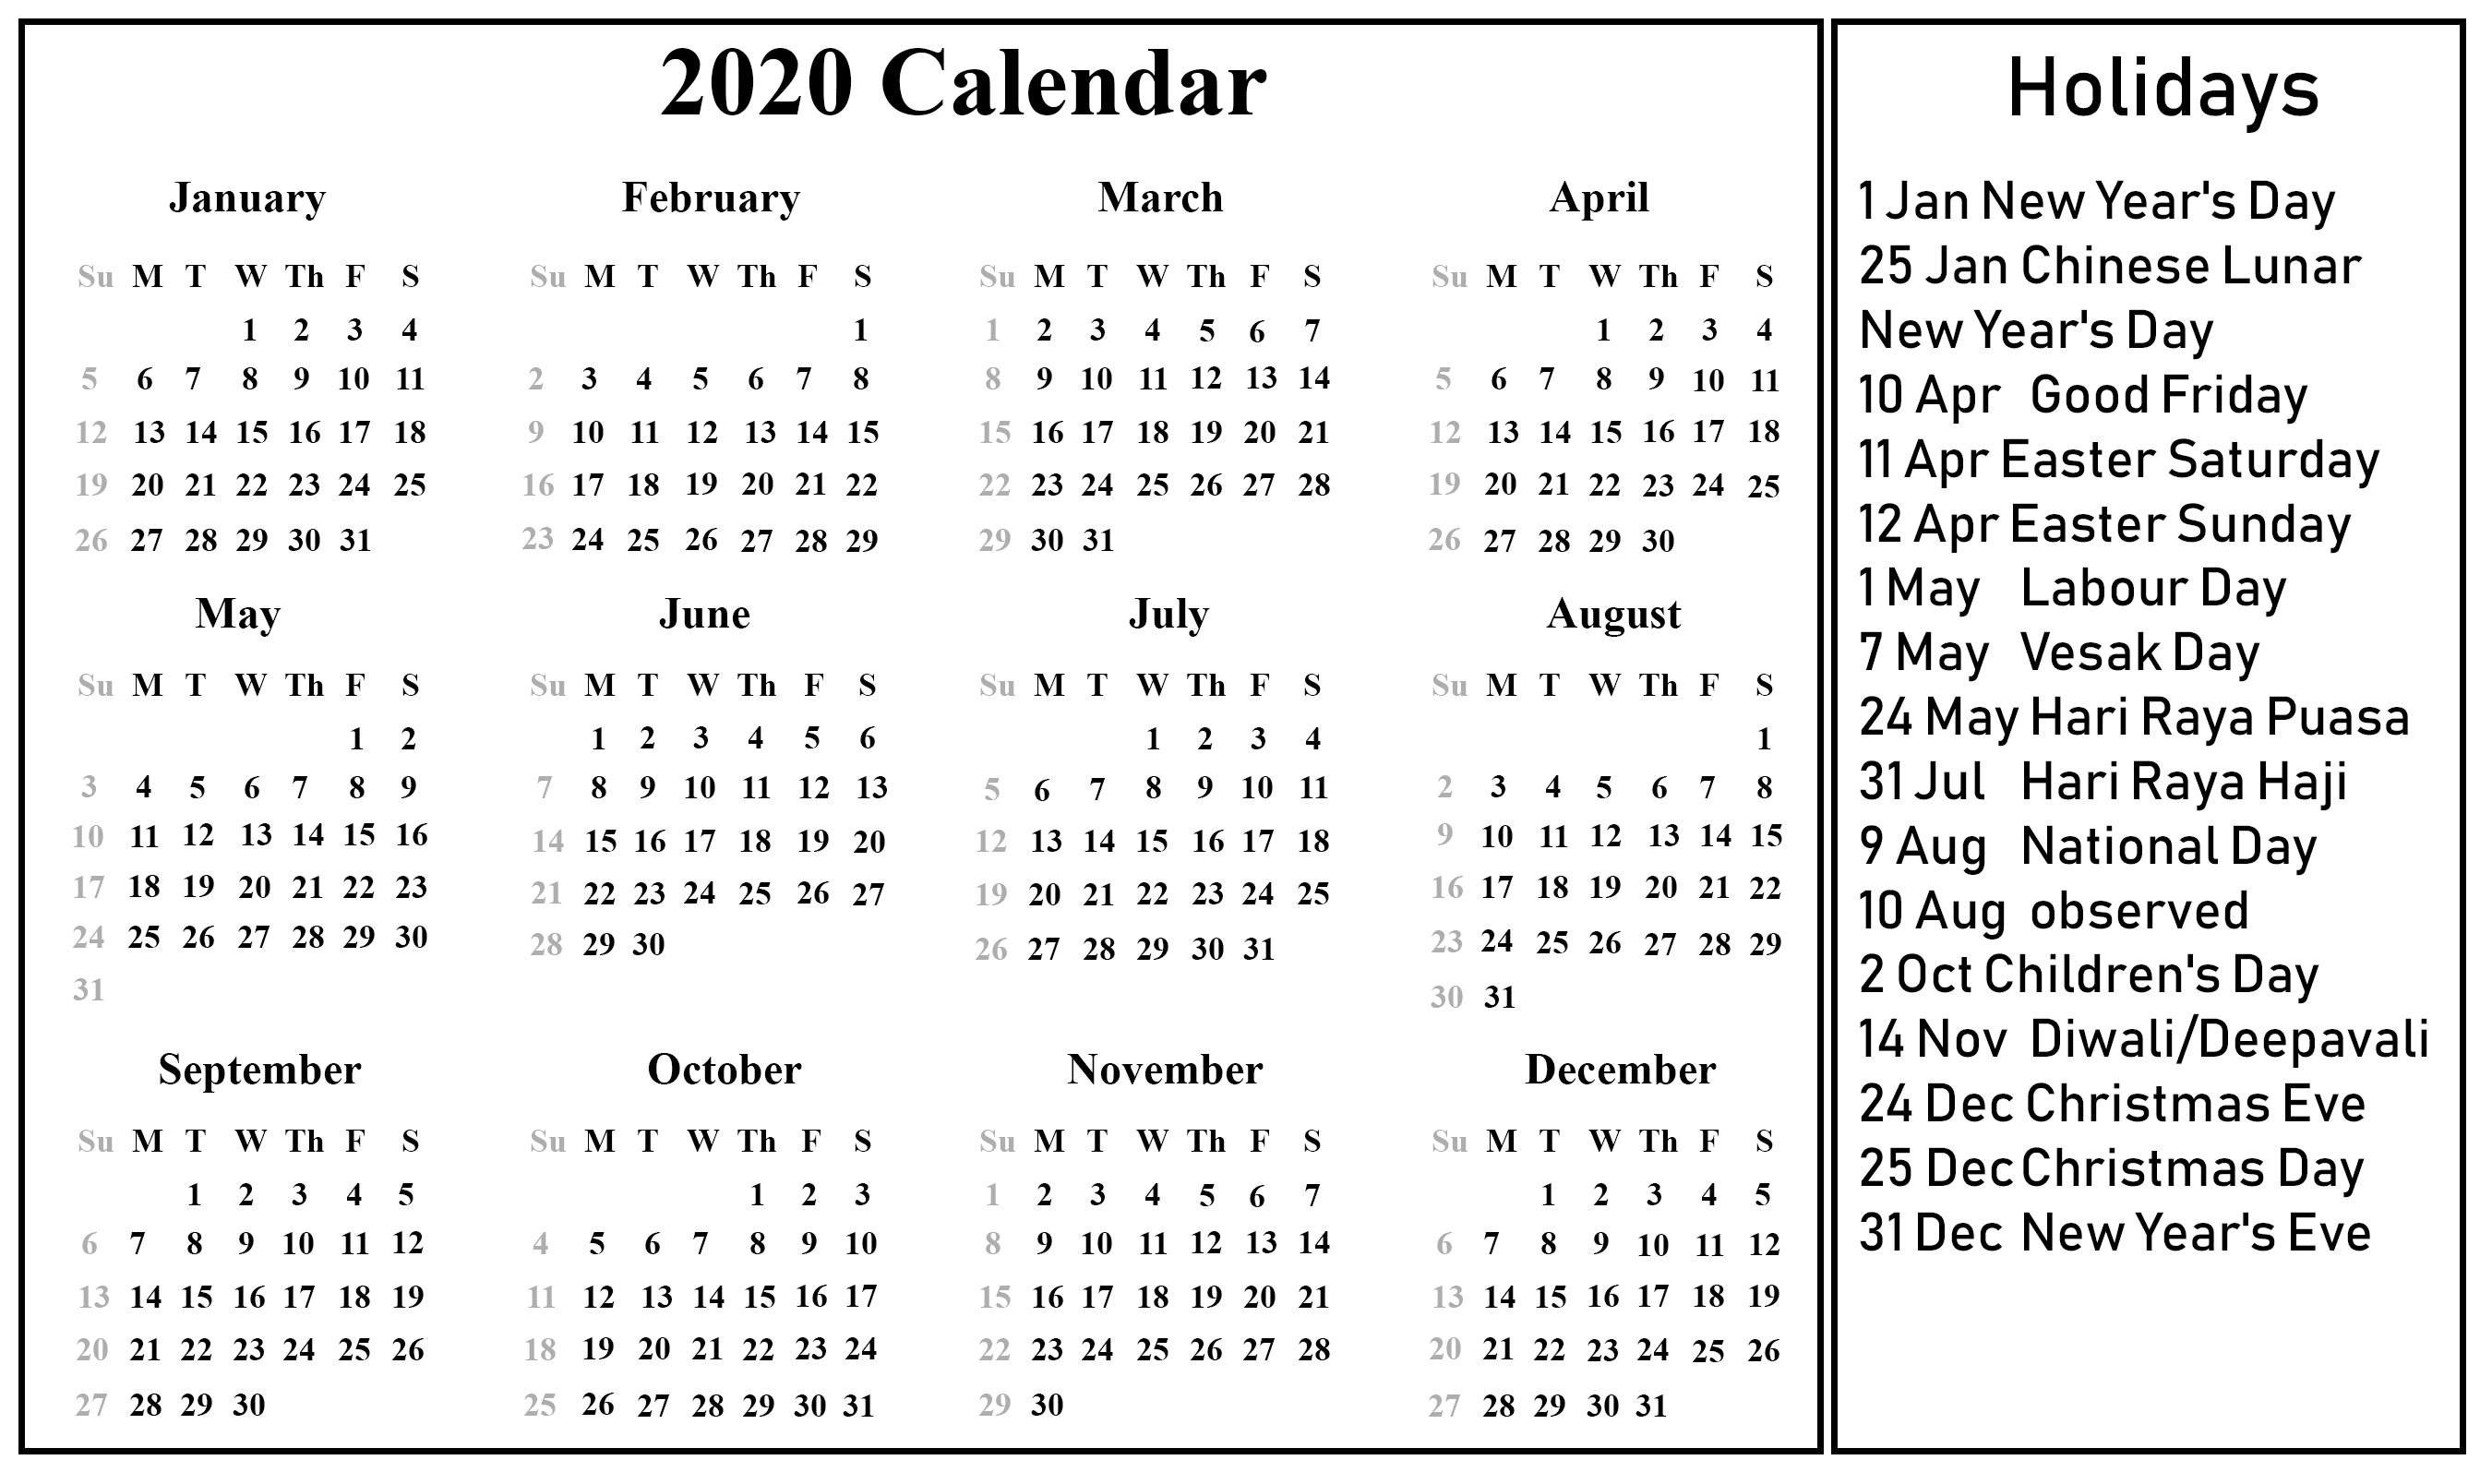 Yearly Calendar With Holidays 2020 - Wpa.wpart.co-April Holidays 2020 In South Africa